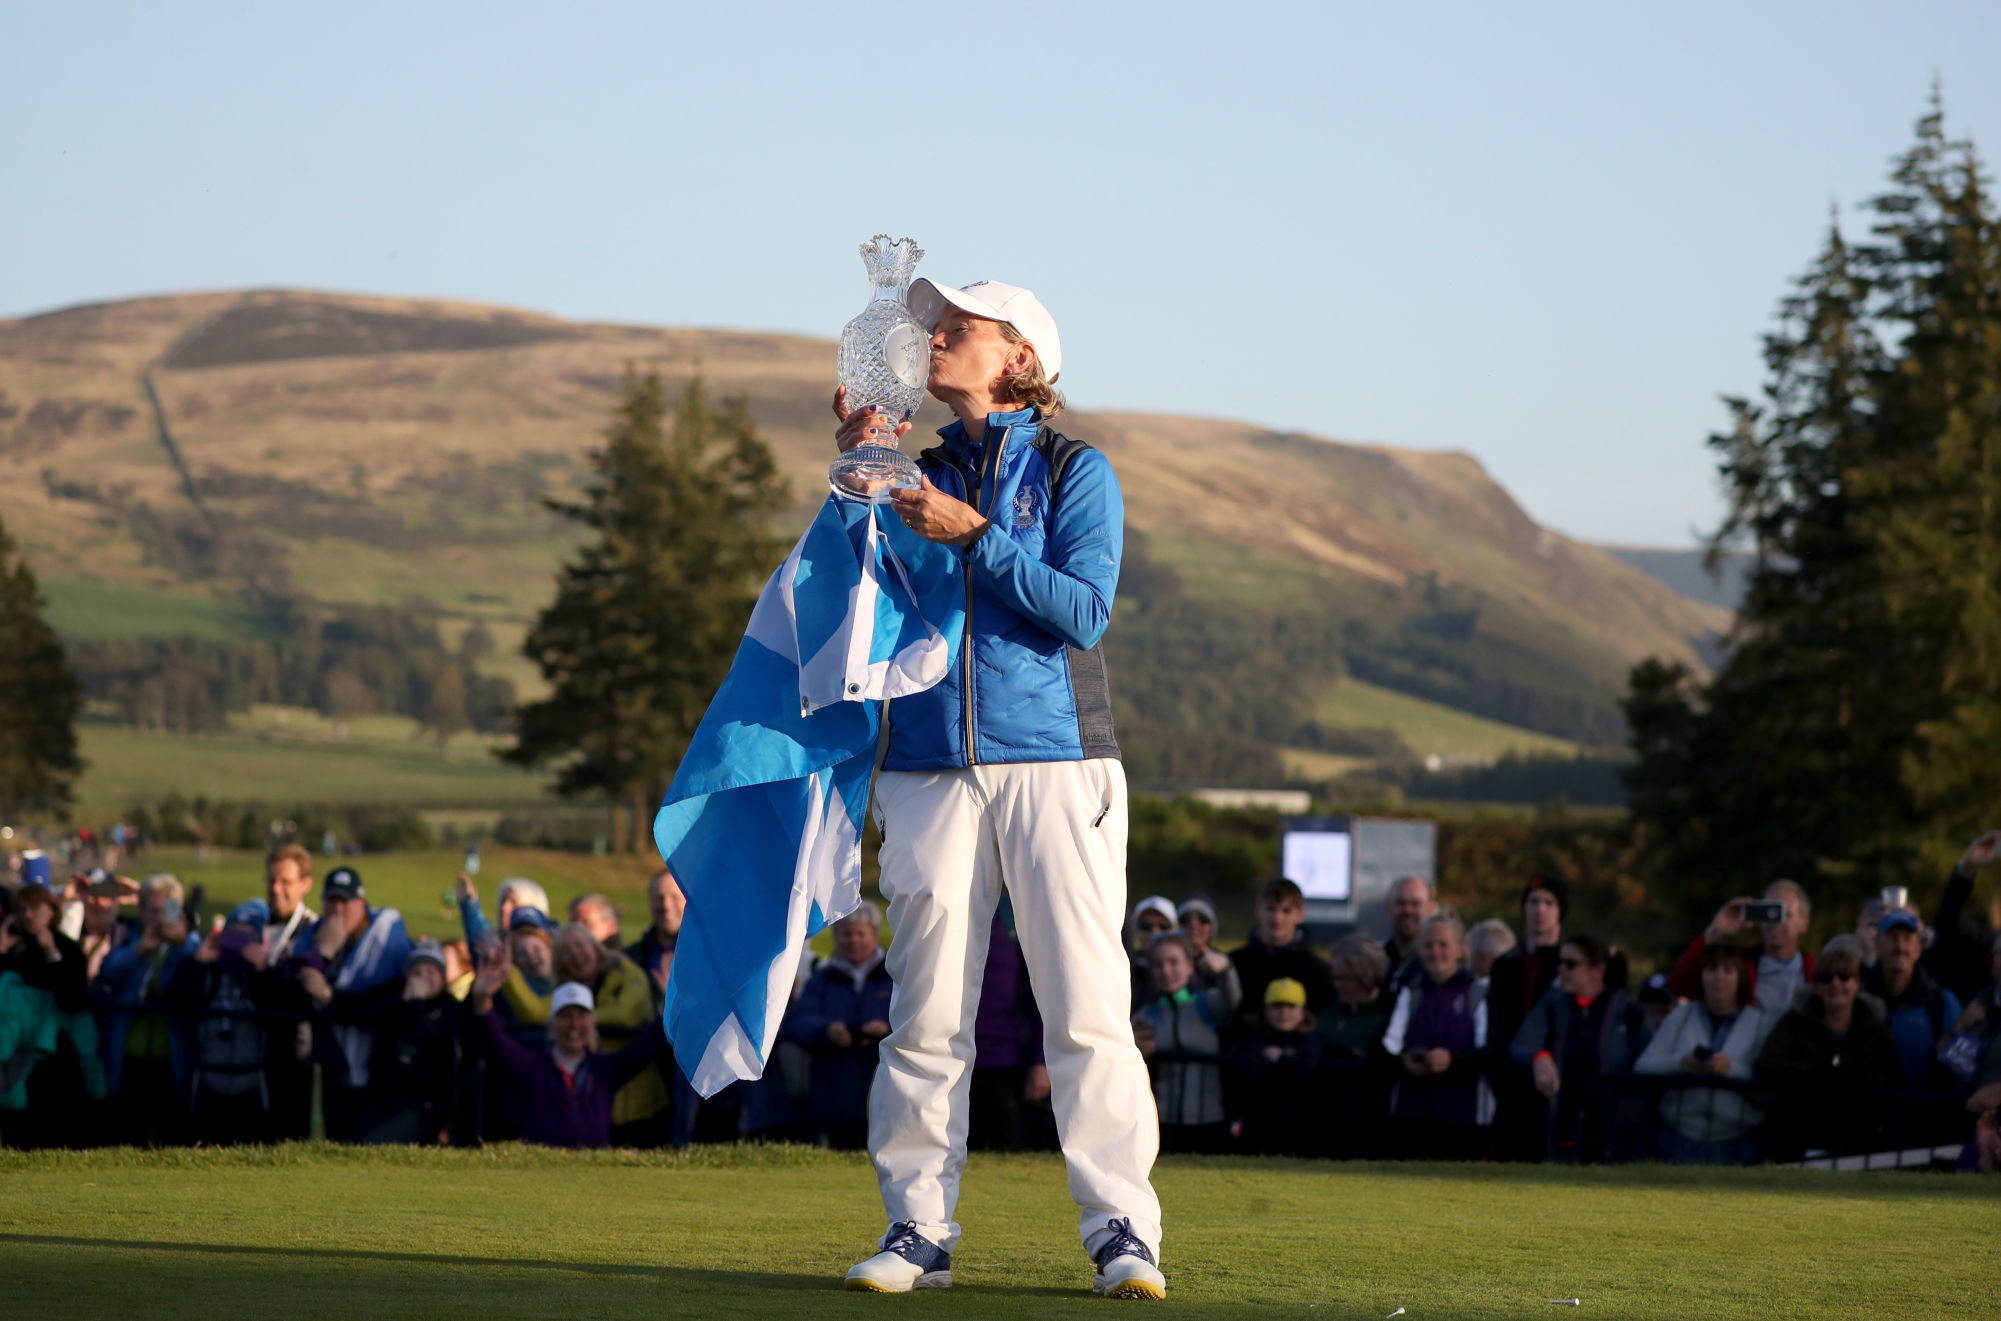 Team Europe captain Catriona Matthew with the trophy after winning the 2019 Solheim Cup at Gleneagles Golf Club, Auchterarder. 

Photo by Icon Sport - Catriona MATTHEW - Gleneagles Golf Club - Auchterarder (Ecosse)